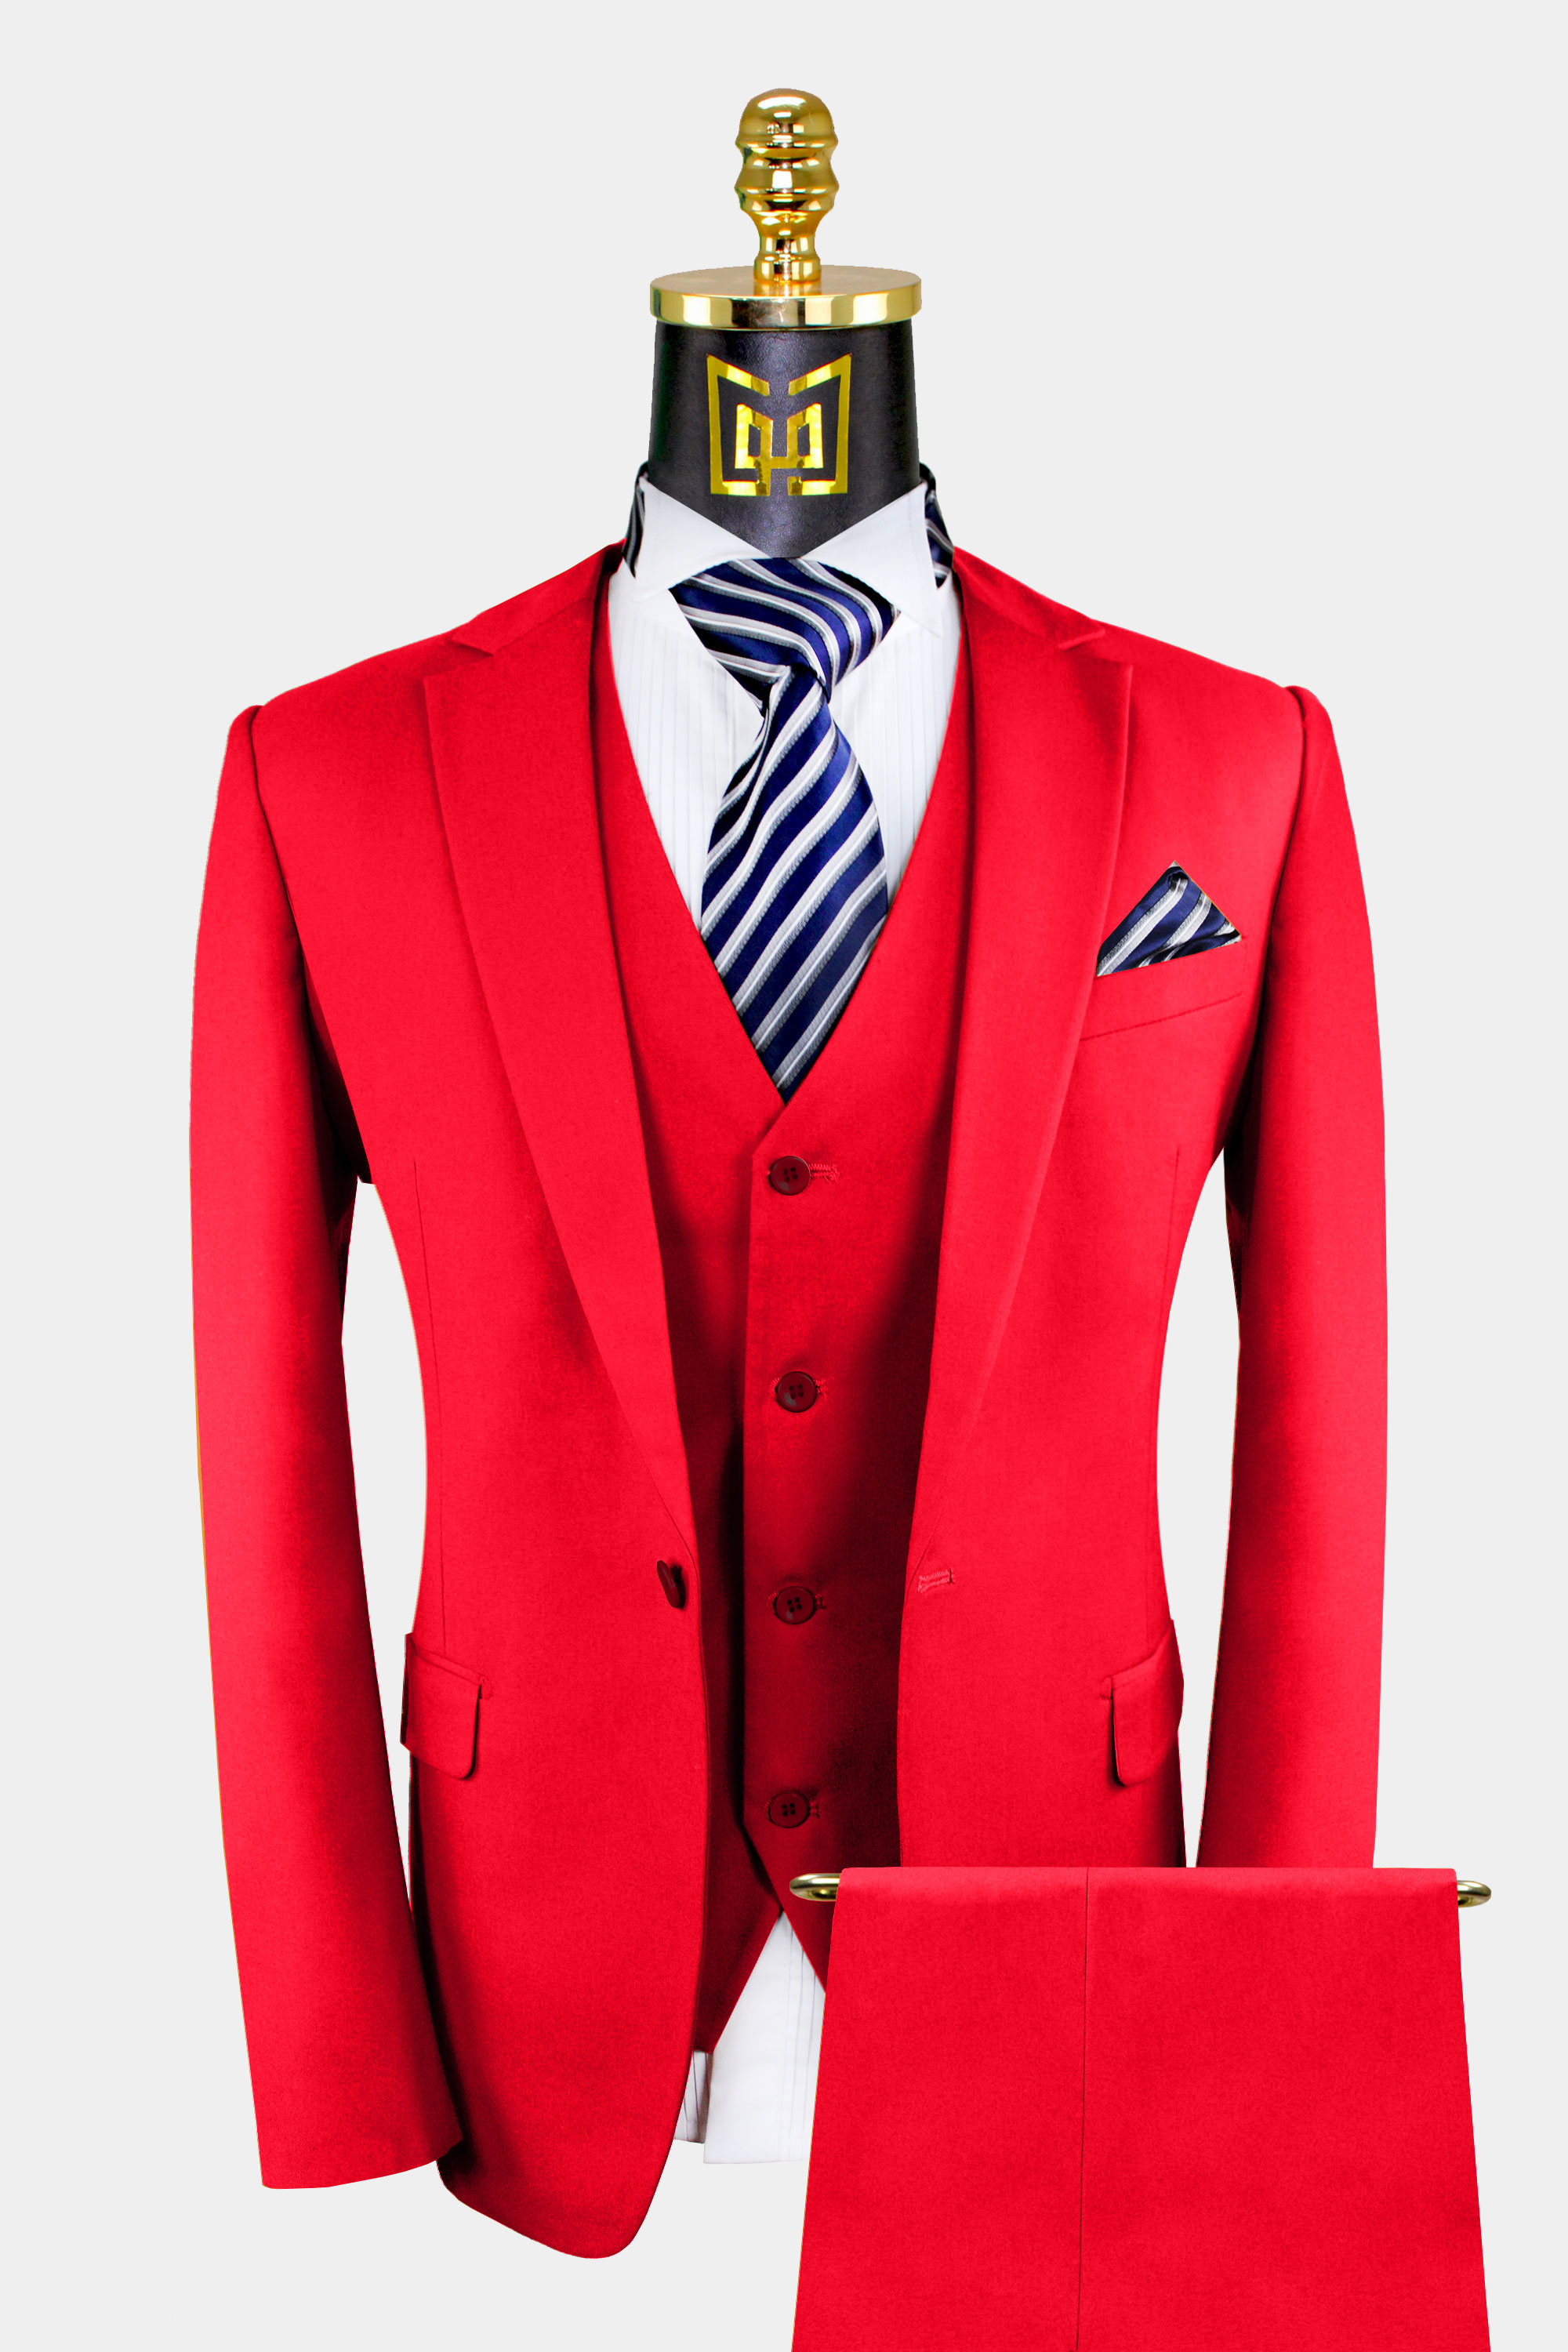 Classic All Red Suit - 3 Piece